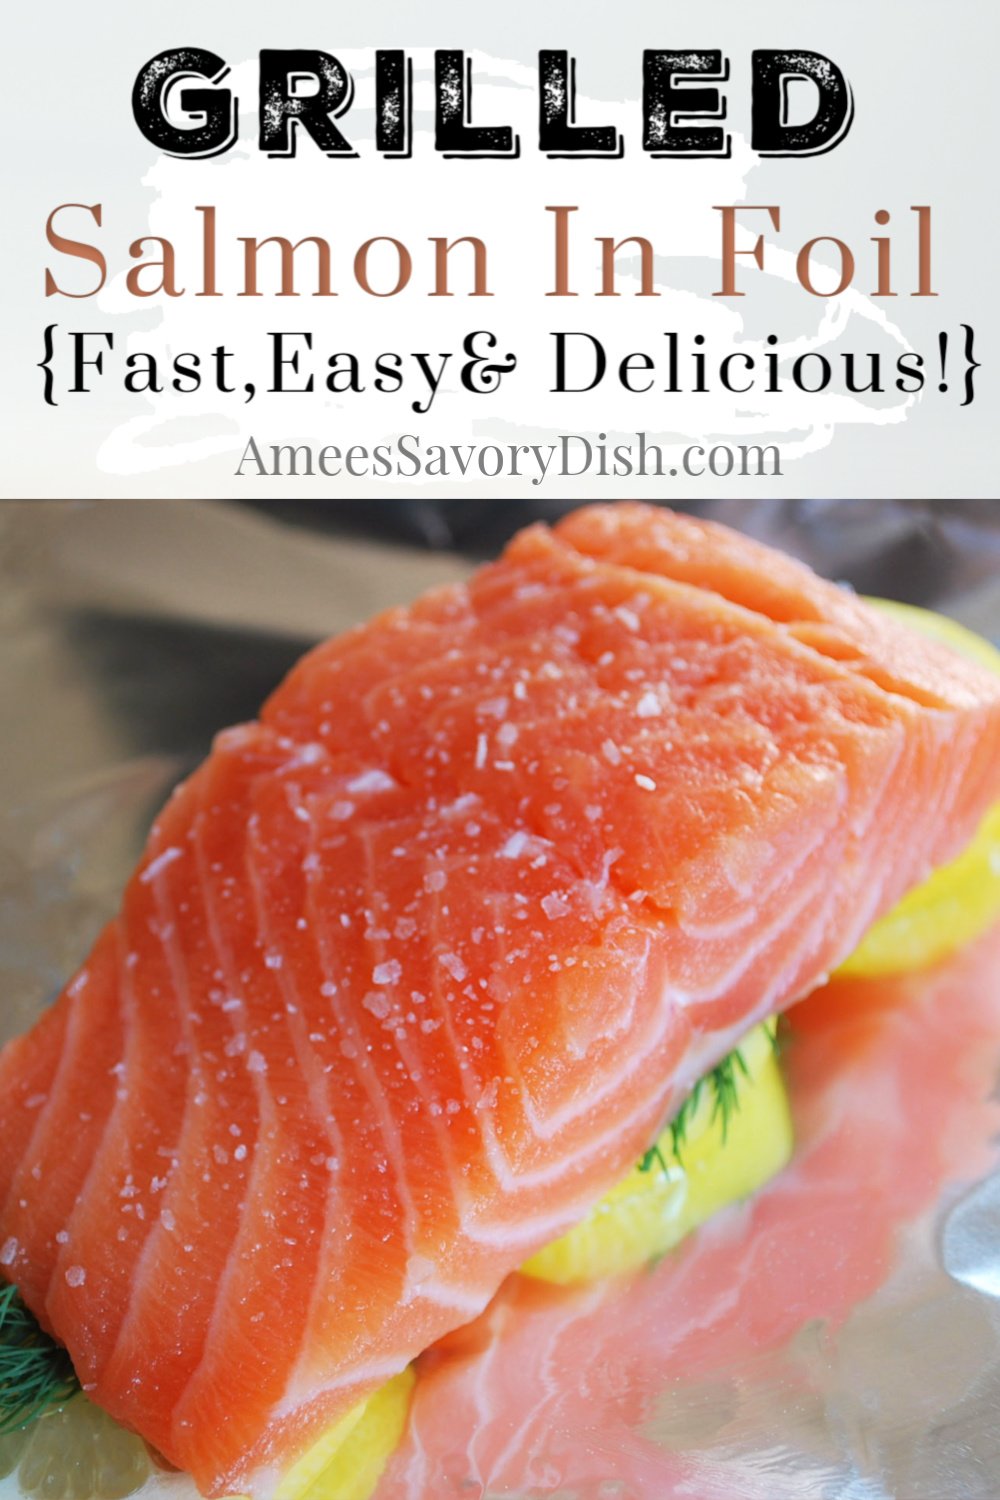 Grilled Salmon In Foil Packets is a simple healthy recipe that comes together and cooks in less than 20 minutes. #grilledsalmon #salmonrecipe #foilpacketsalmon #foilpacketmeals #salmon #seafoodrecipe via @Ameessavorydish